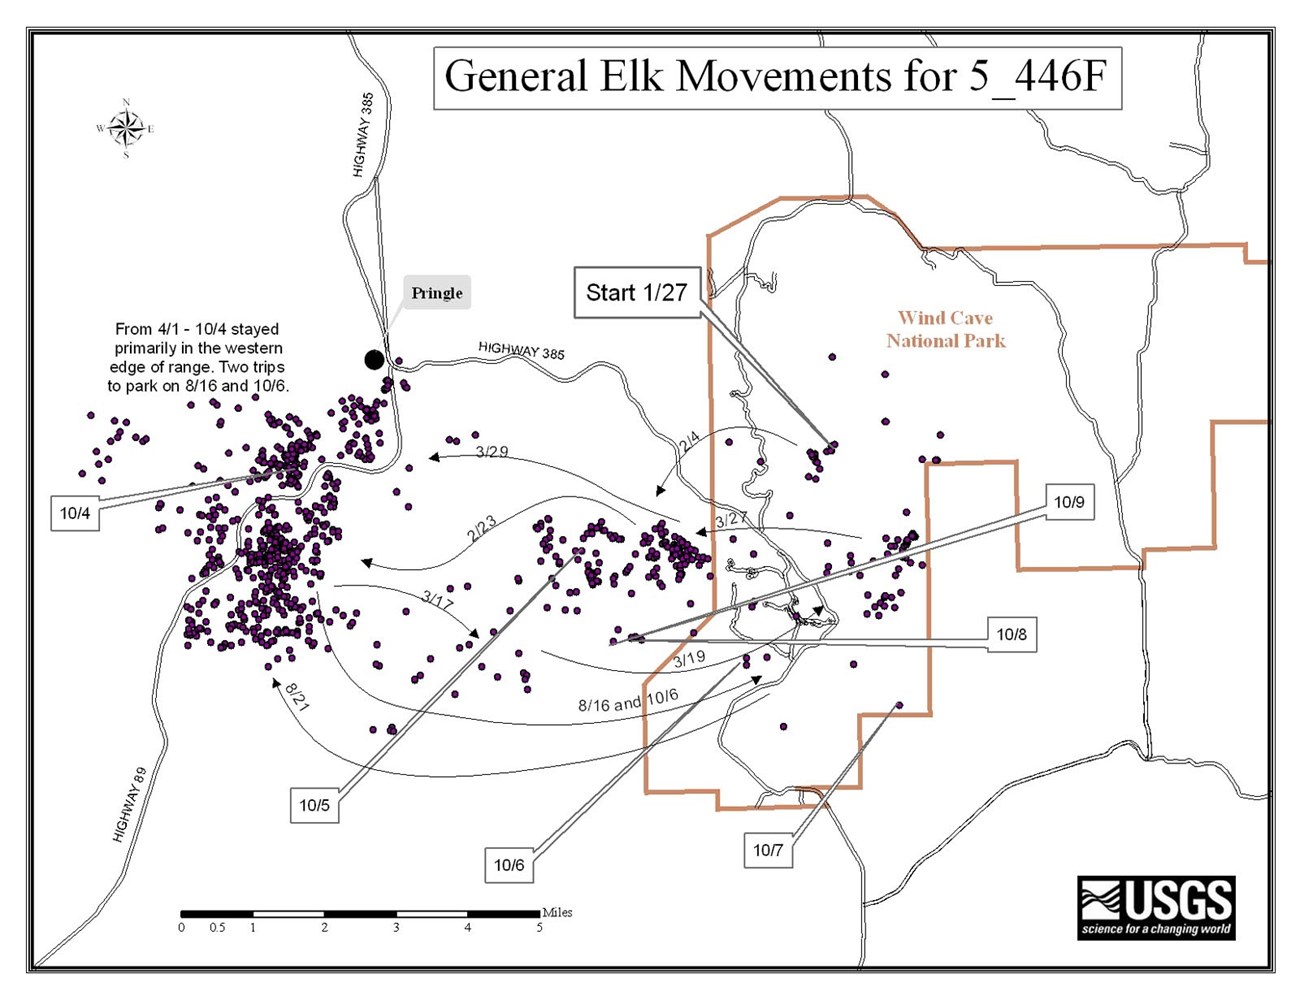 Map showing the movements of an elk collared in 2005.